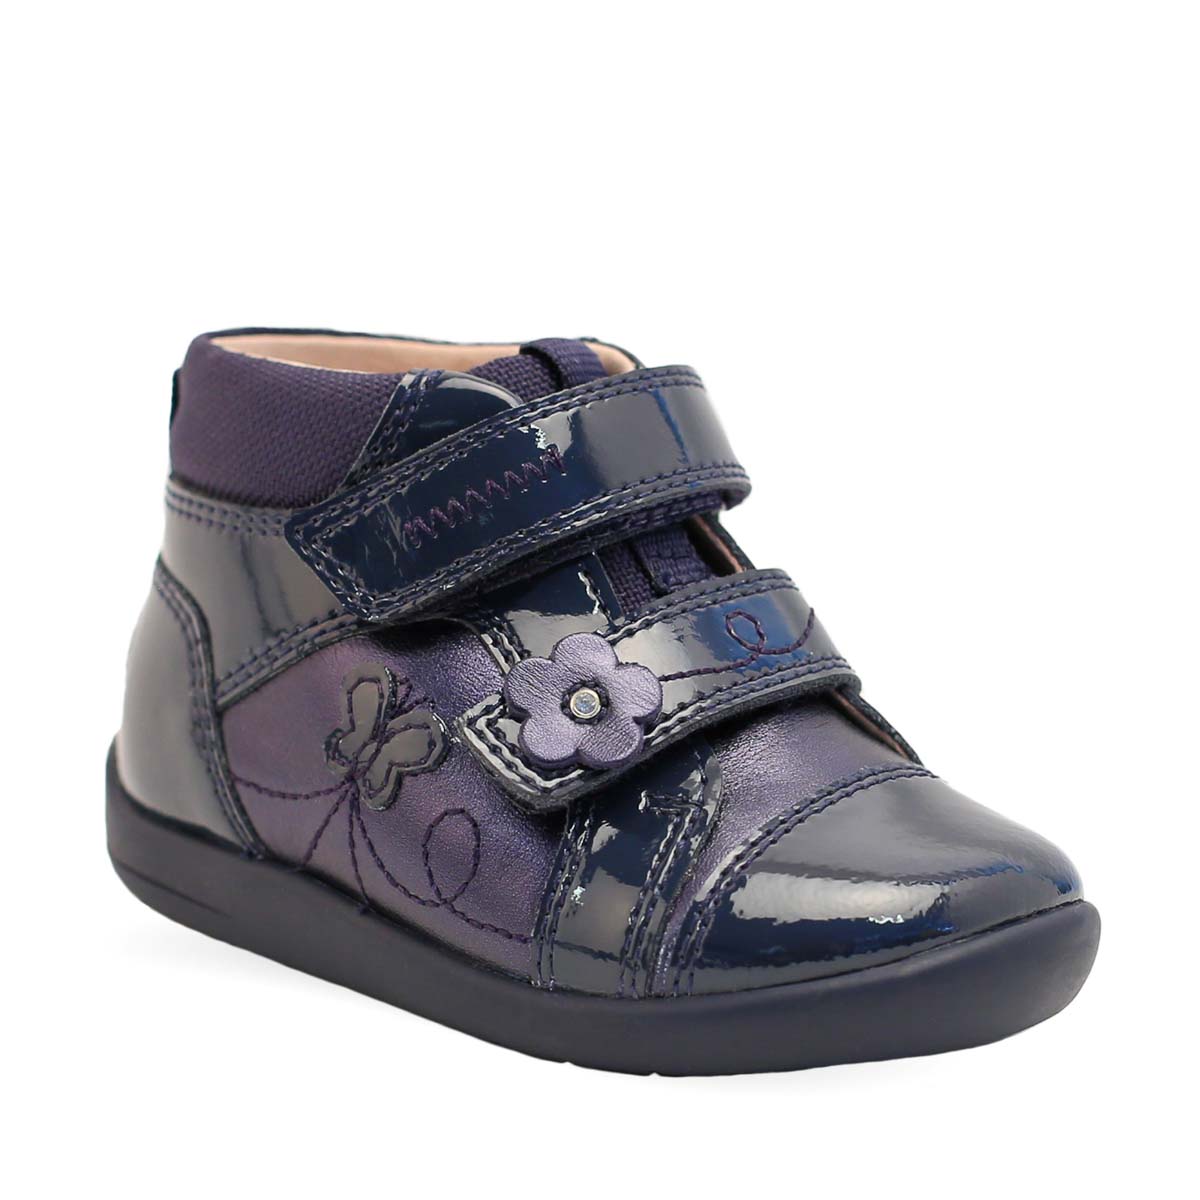 Start Rite - Daydream 2V In Navy Patent 0792-96F In Size 4.5 In Plain Navy Patent Infant Girls Boots  In Navy Patent For kids